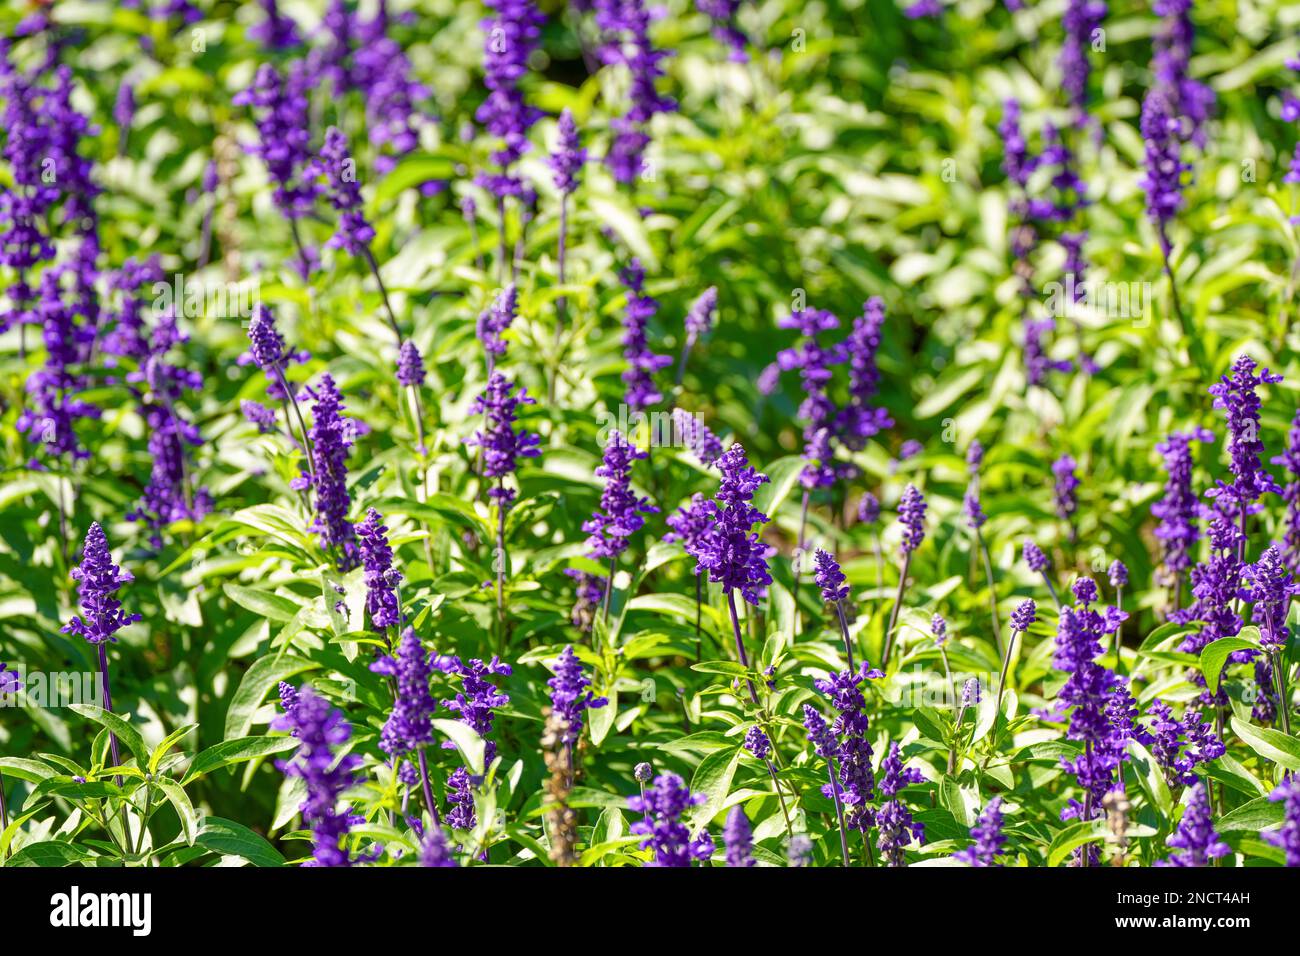 Flower bed with blooming sage. Salvia. Stock Photo